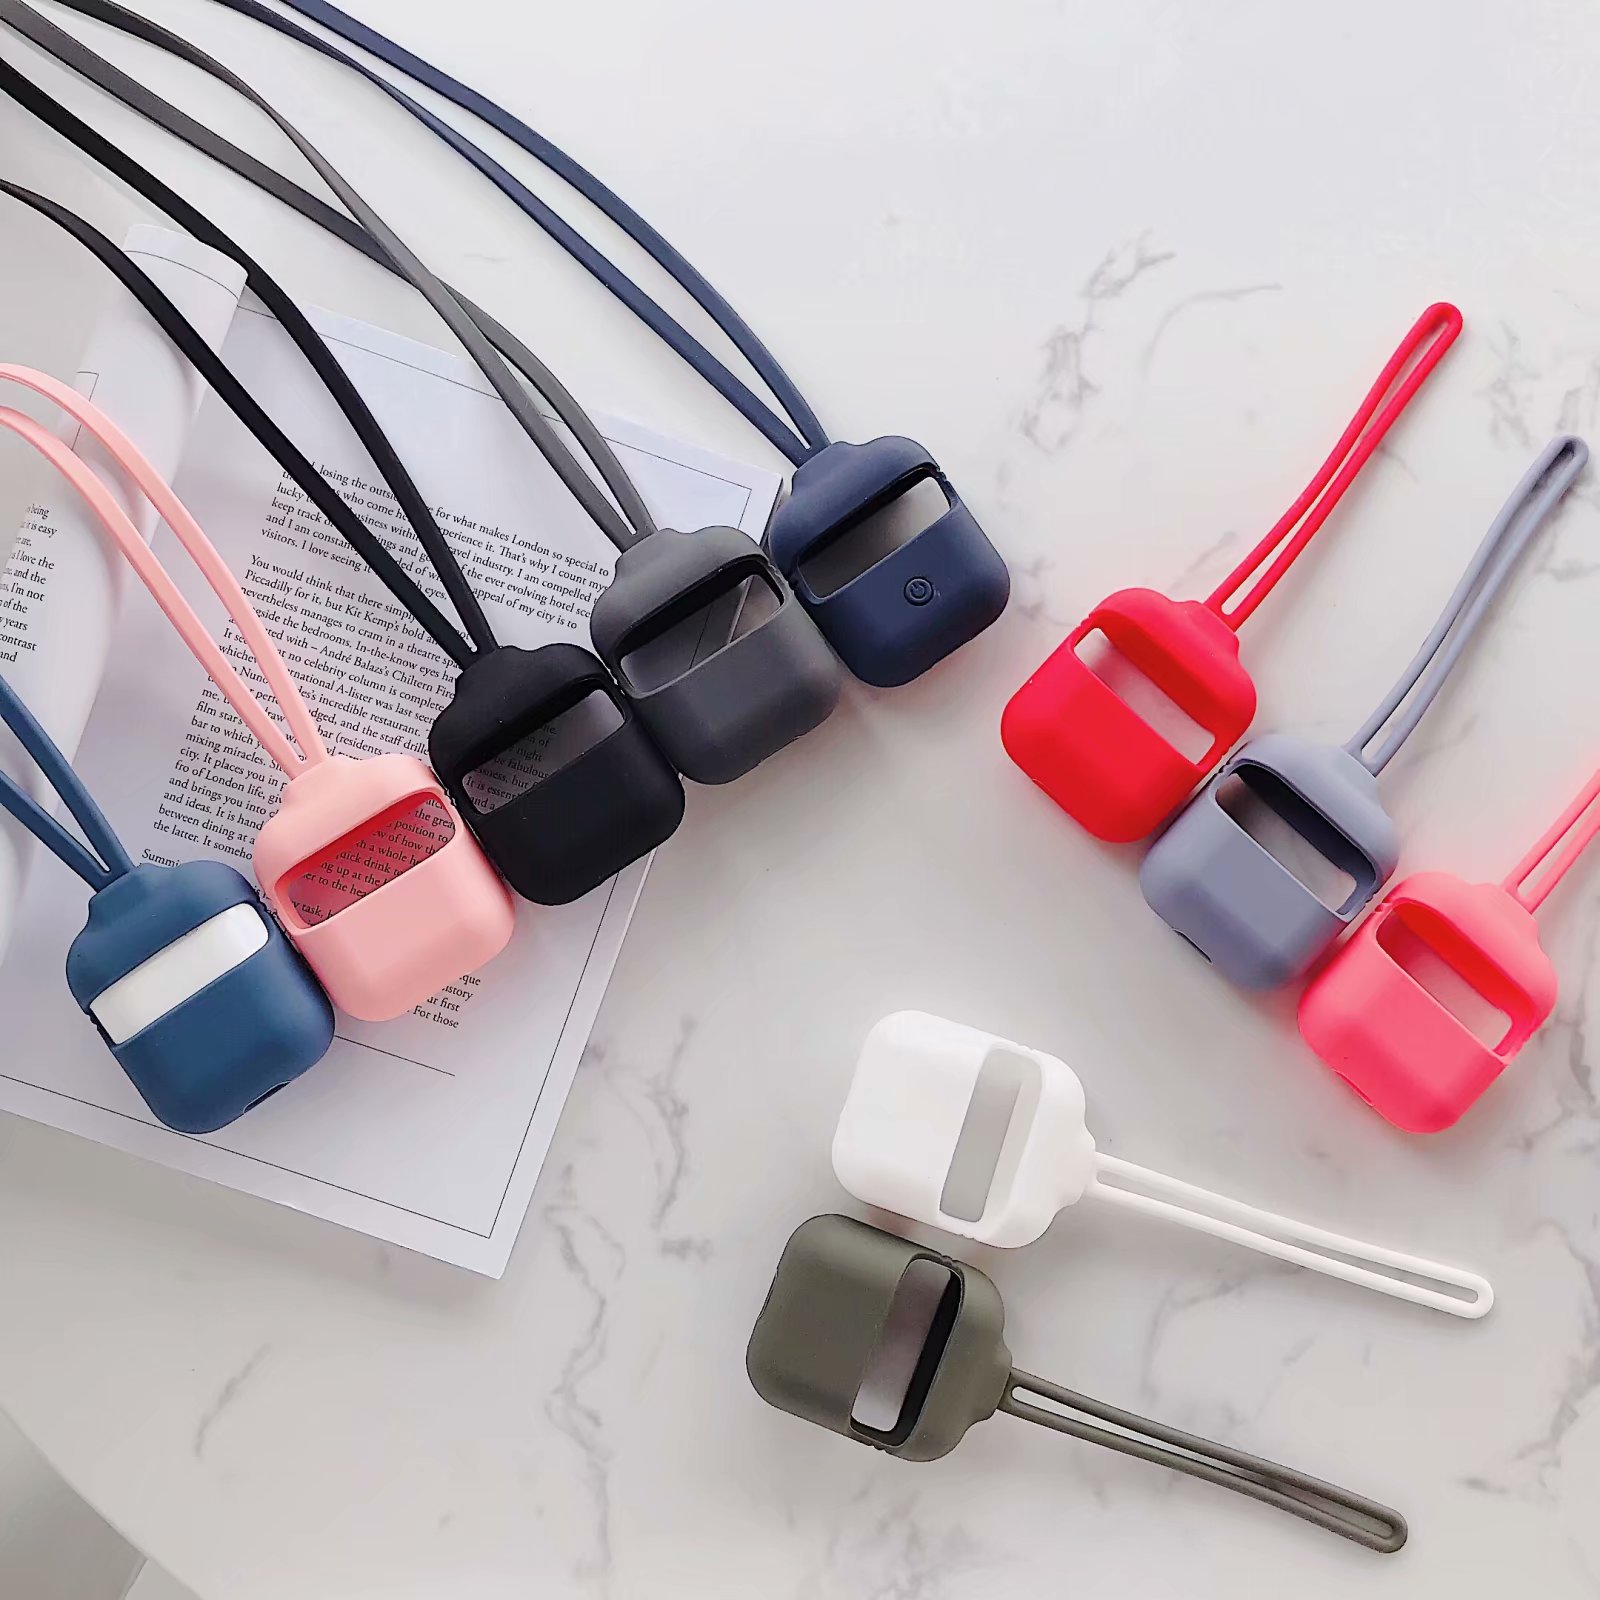 Silicone Protective Capsule Case with For AirPods Charging Case Protect Skin Good Quality Liquid Silicone Material Feeling - ANKUX Tech Co., Ltd | ANKUX.COM